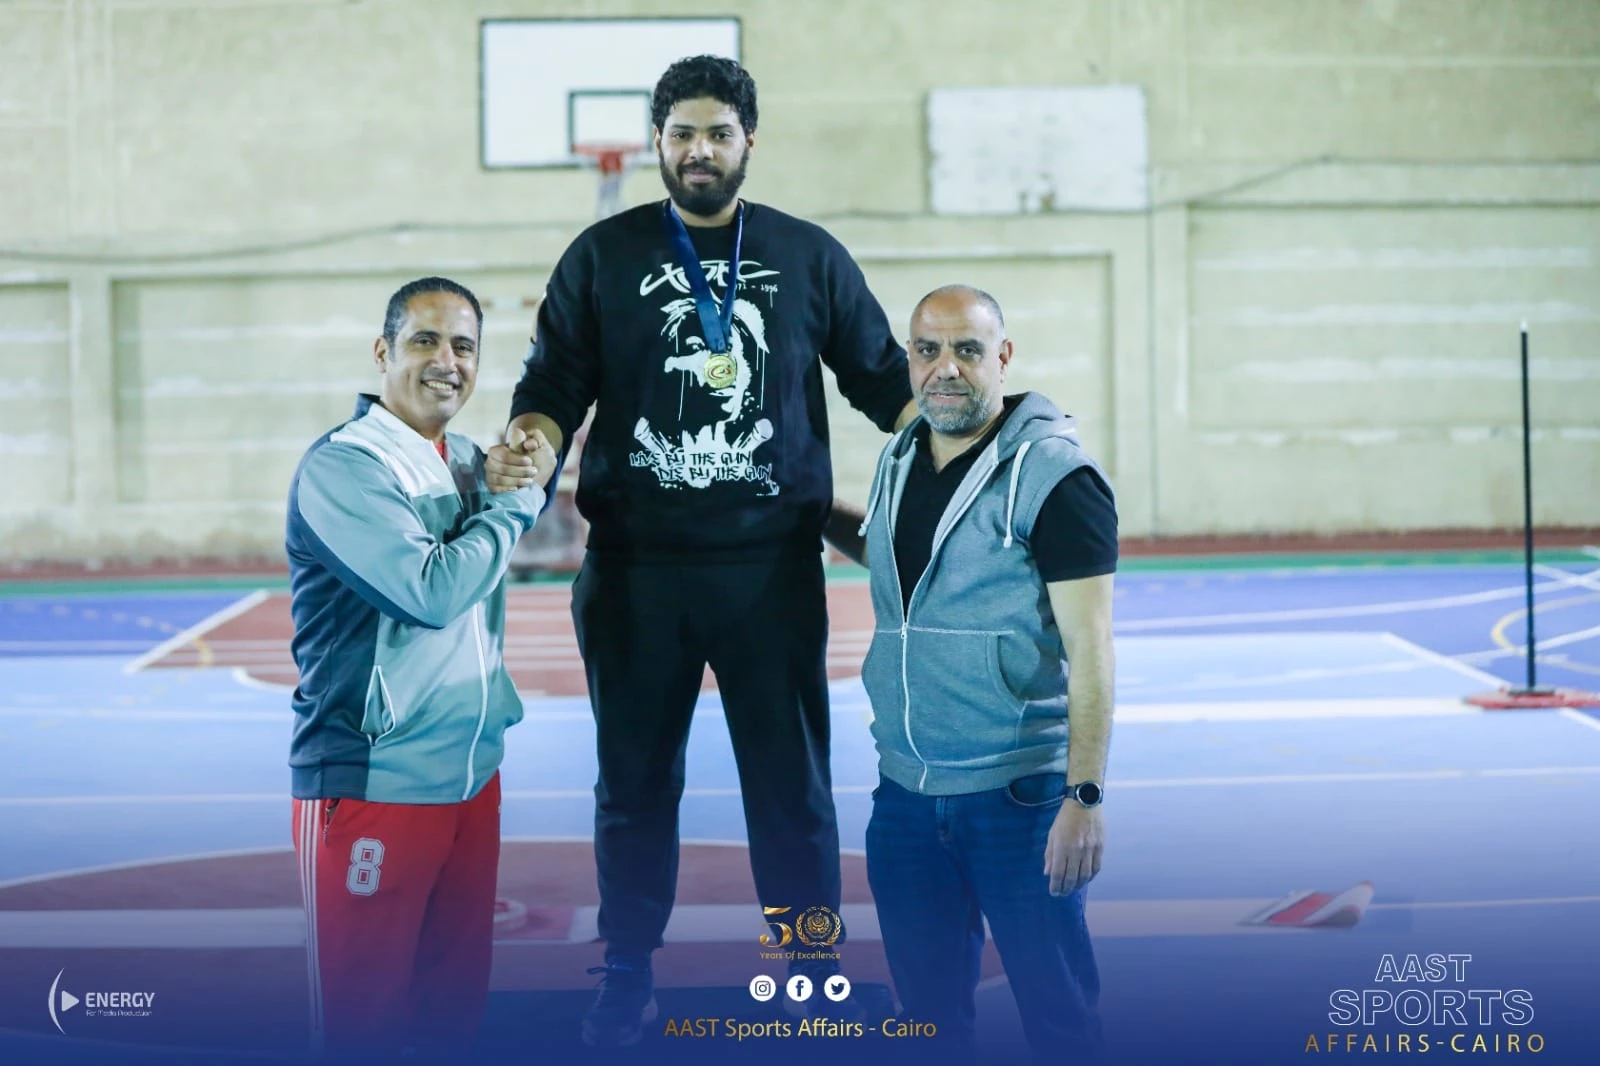 The academy was crowned in Cairo with the first place Cup in the student championship and the first place Cup in the female student championship in the private universities Speedball Championship9